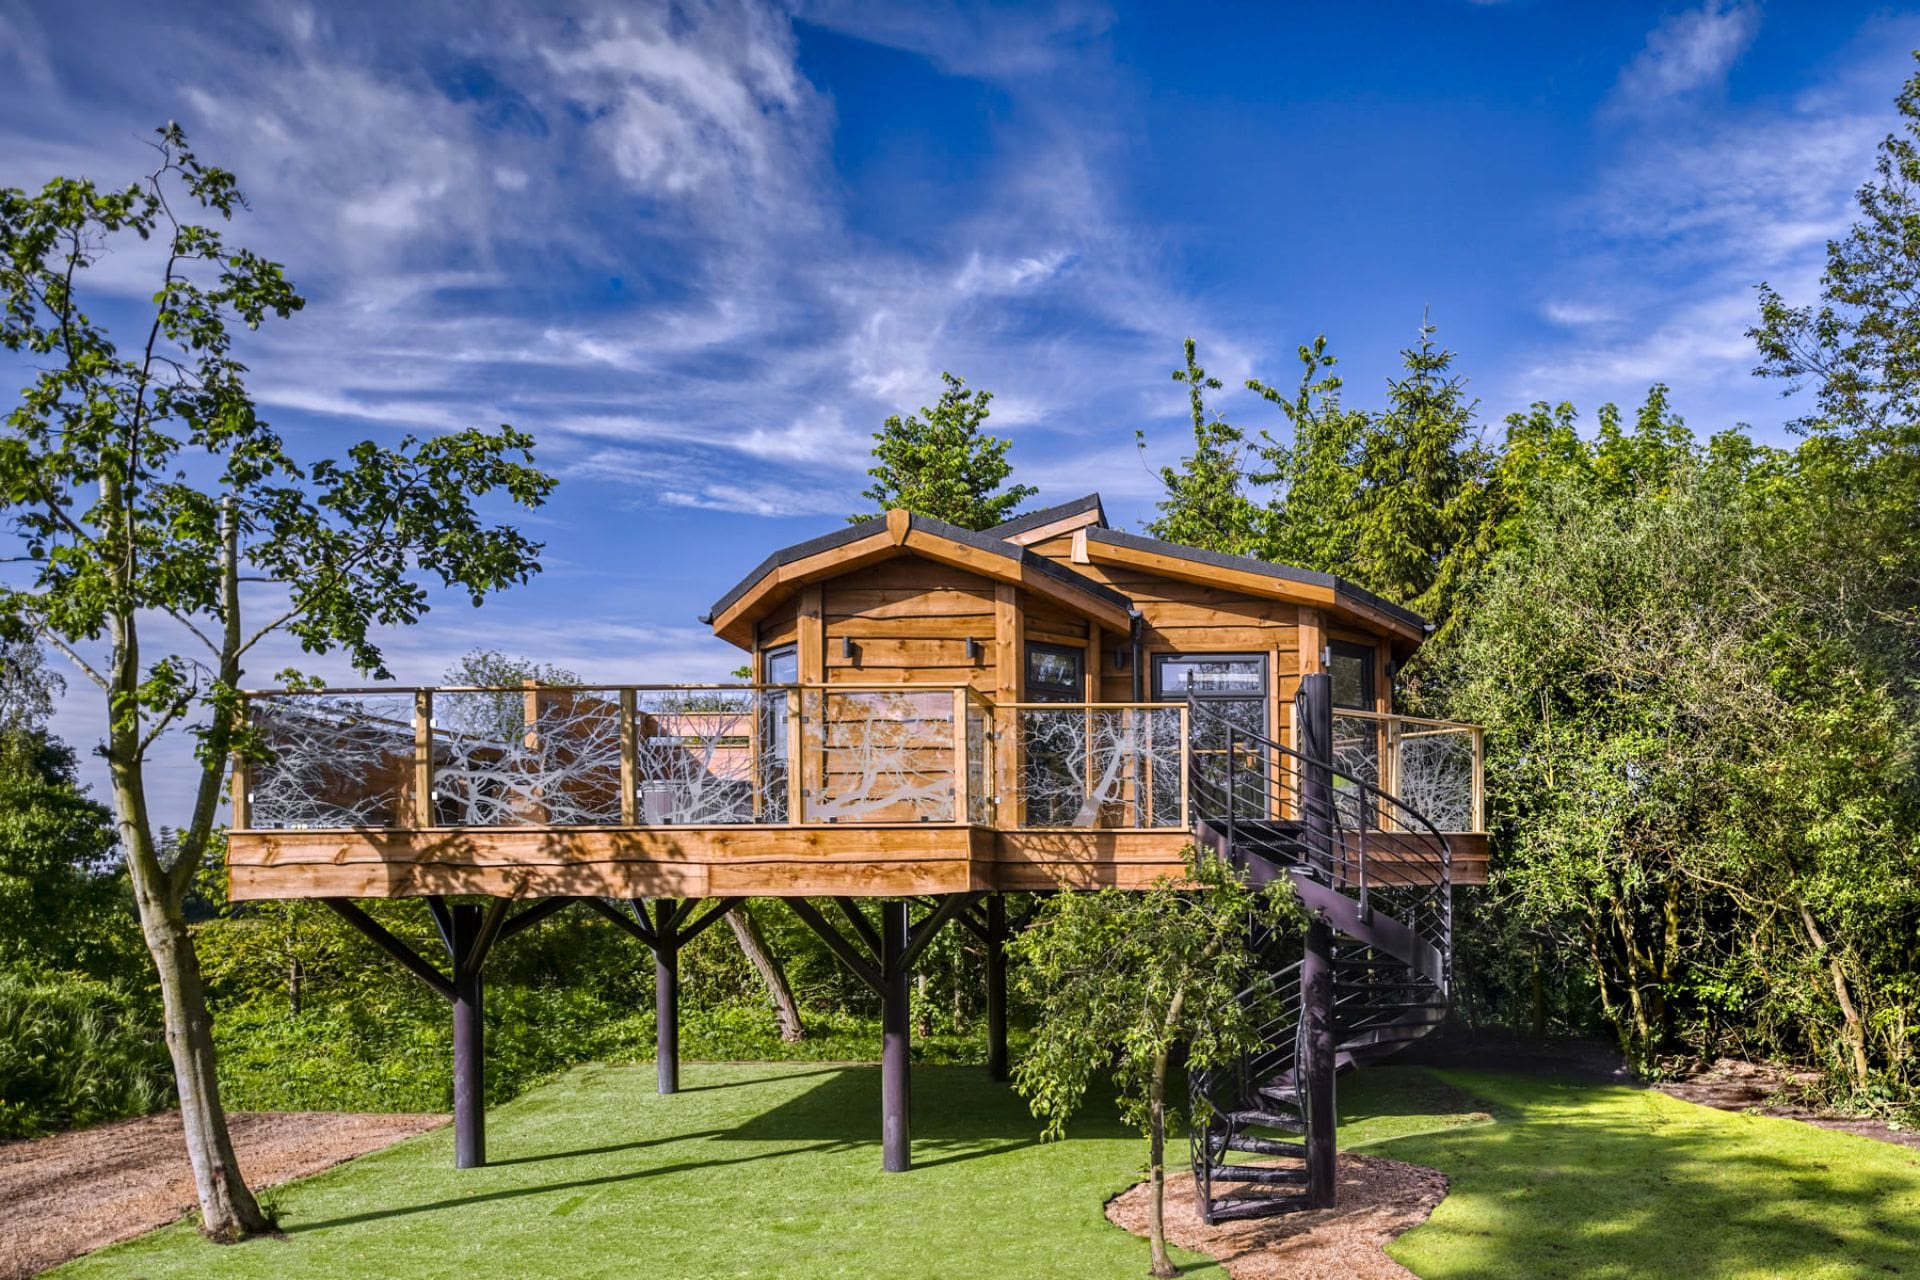 black-spiral-staircase-leading-up-to-treehouse-in-field-wolds-edge-bishop-wilton-yorkshire-treehouse-holidays-uk-with-hot-tub